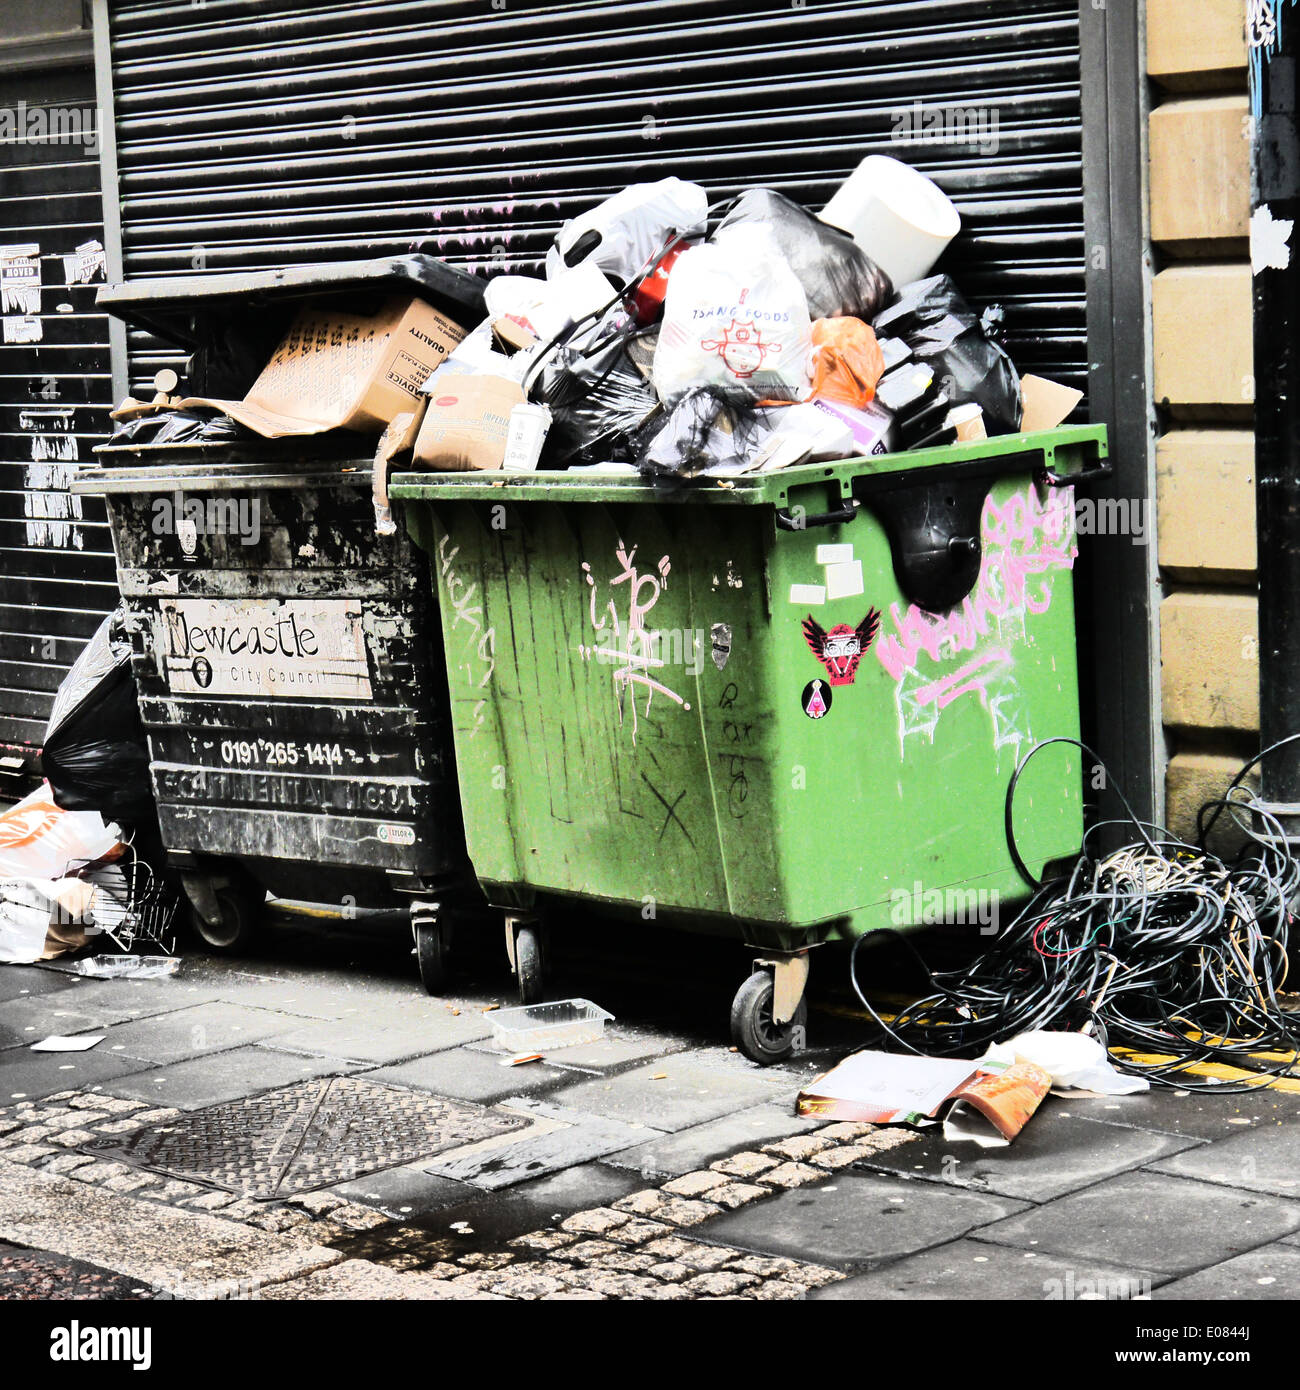 https://c8.alamy.com/comp/E0844J/creative-image-of-over-flowing-coming-refuse-bins-destined-for-recycling-E0844J.jpg